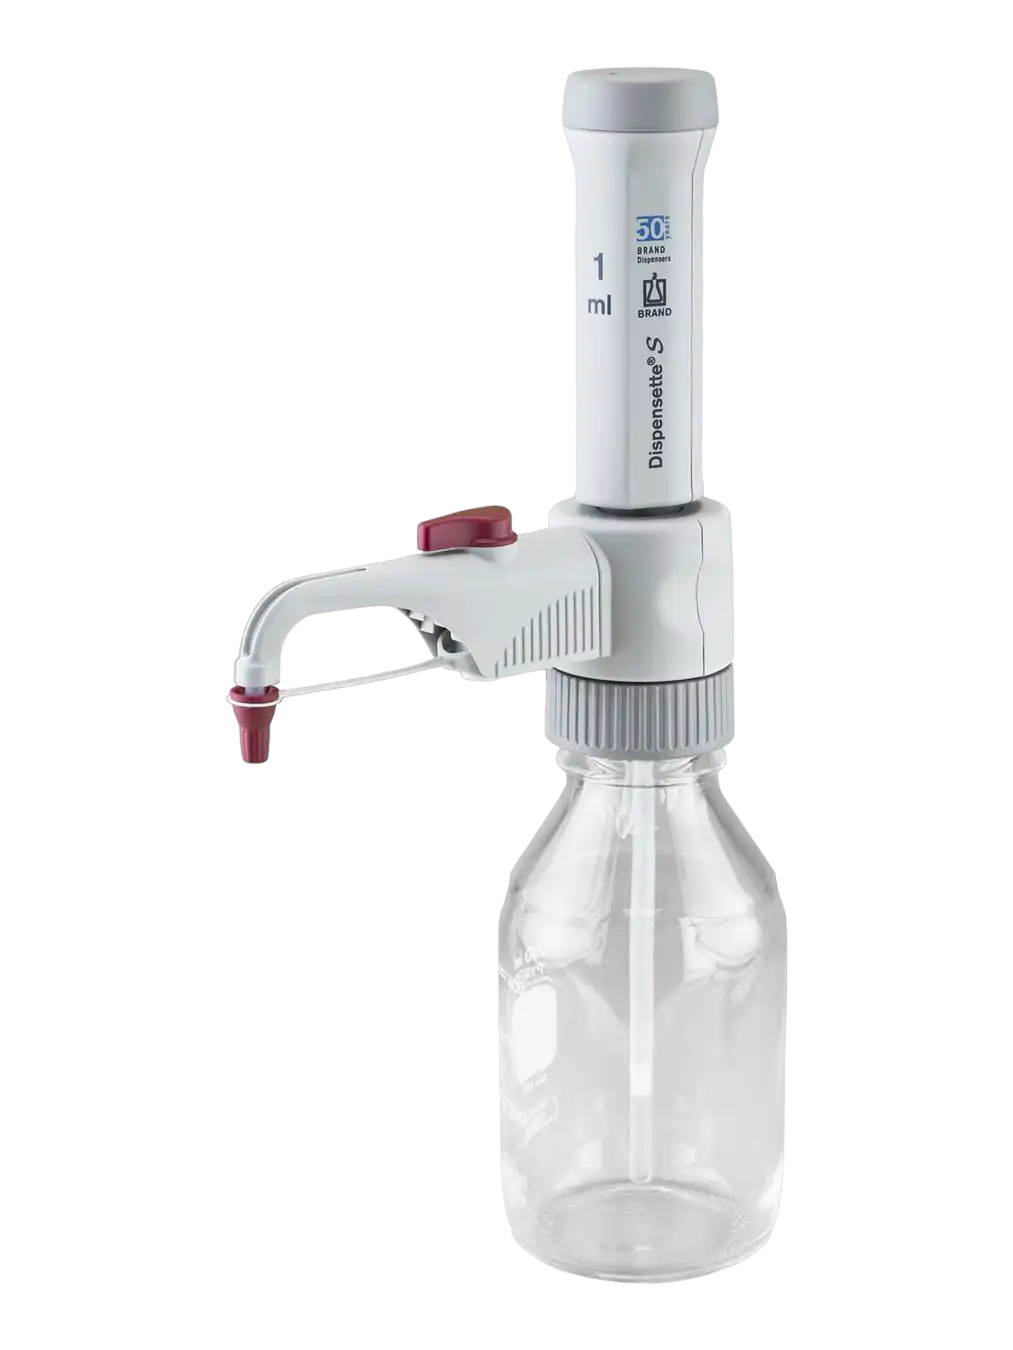 Bottle-Top Dispenser, Dispensette® S, With Recirculation Valve 2 ml Fixed Volume, 0,01 ml Accuracy